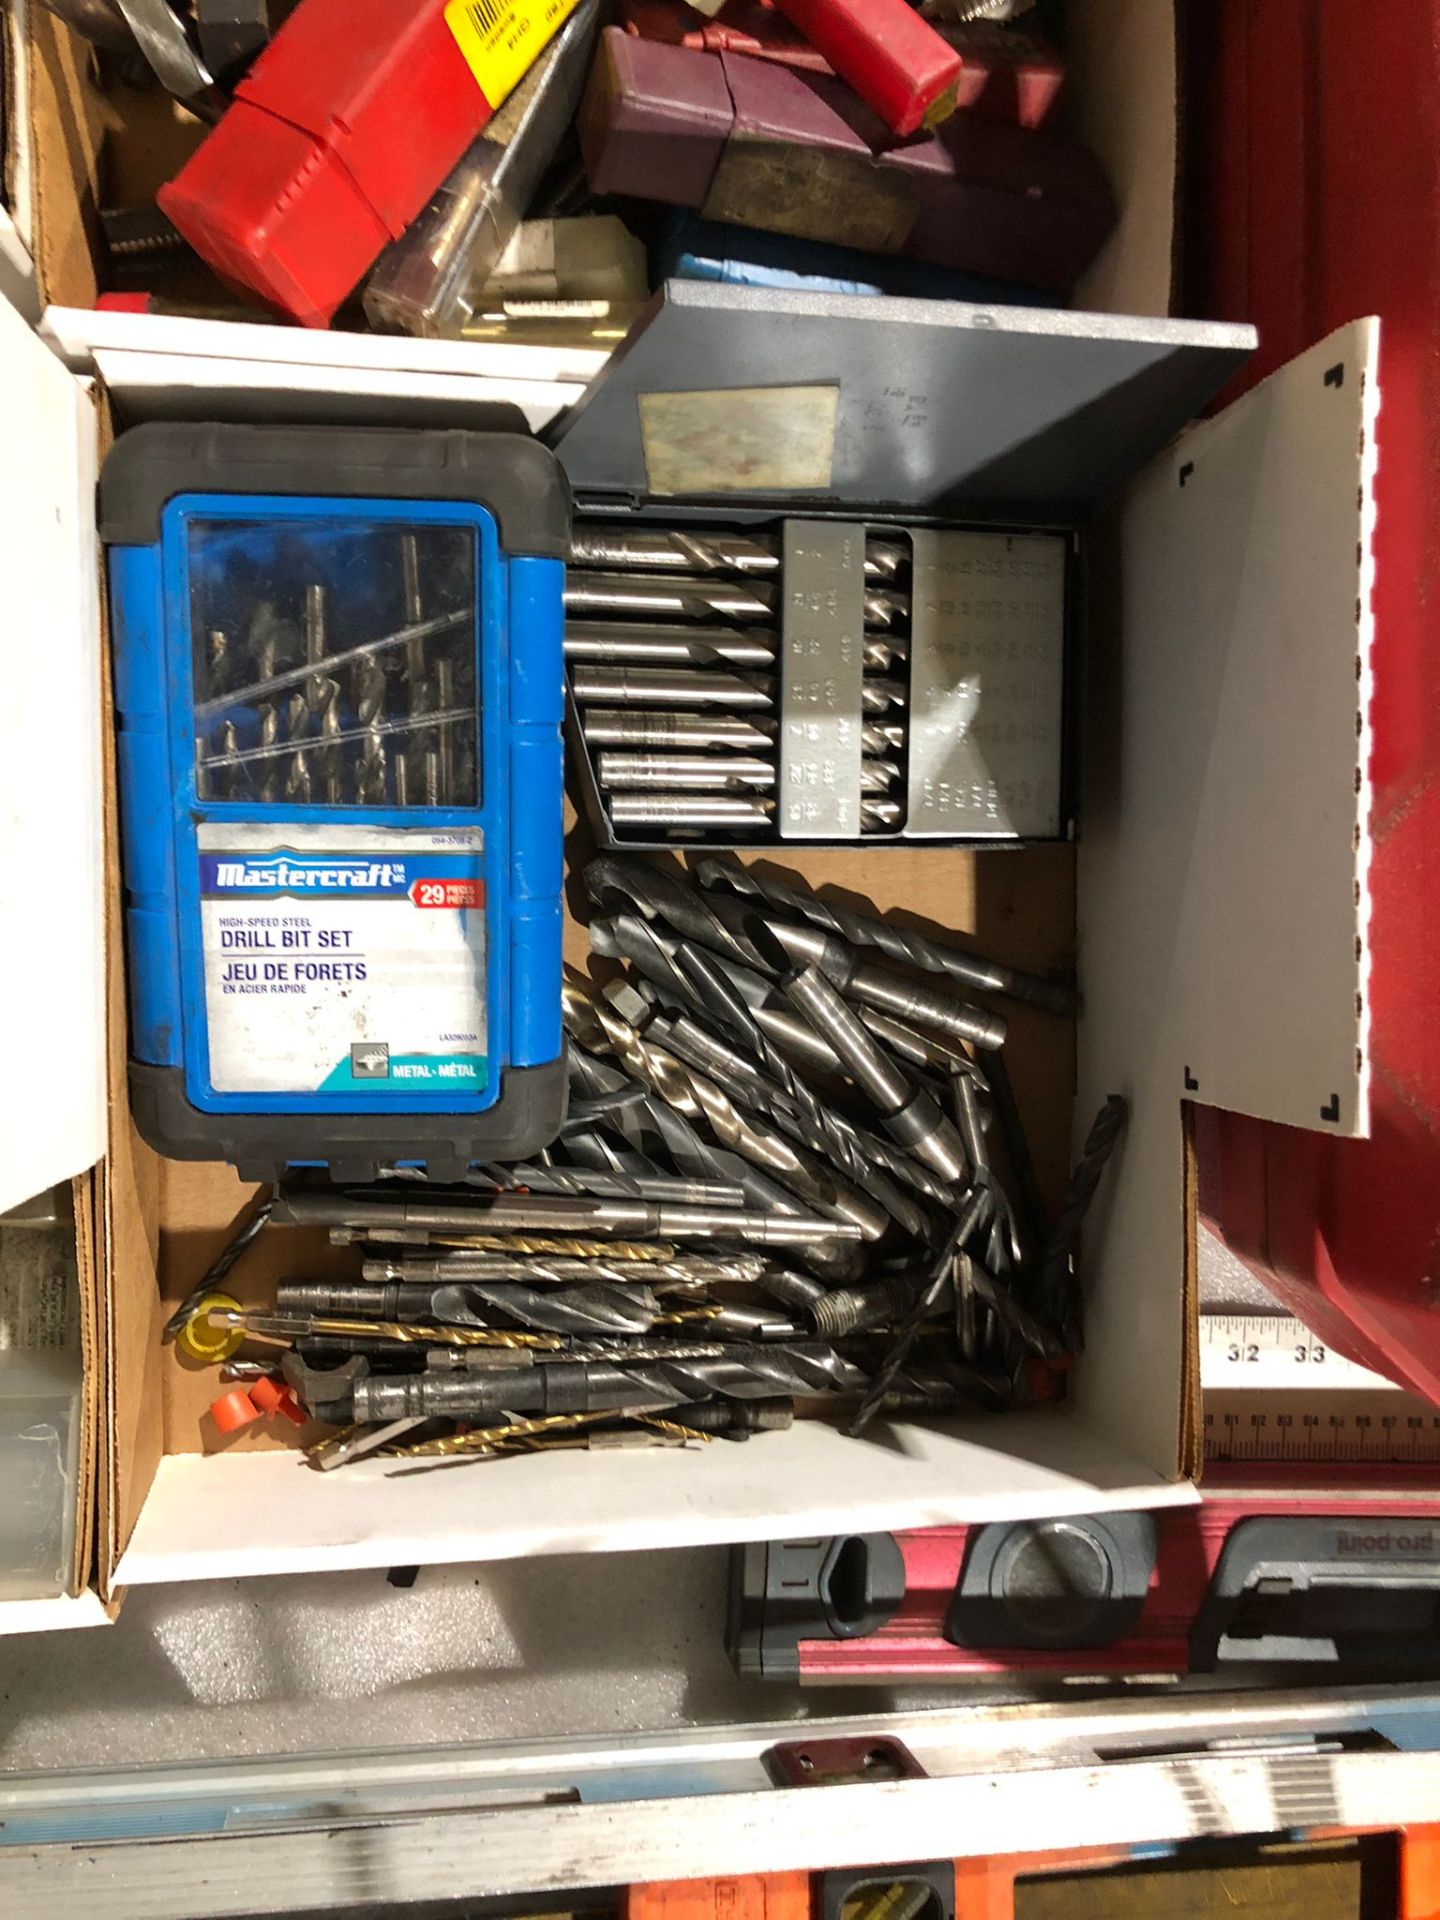 Lot of Drill Bit Sets & Taps in cases